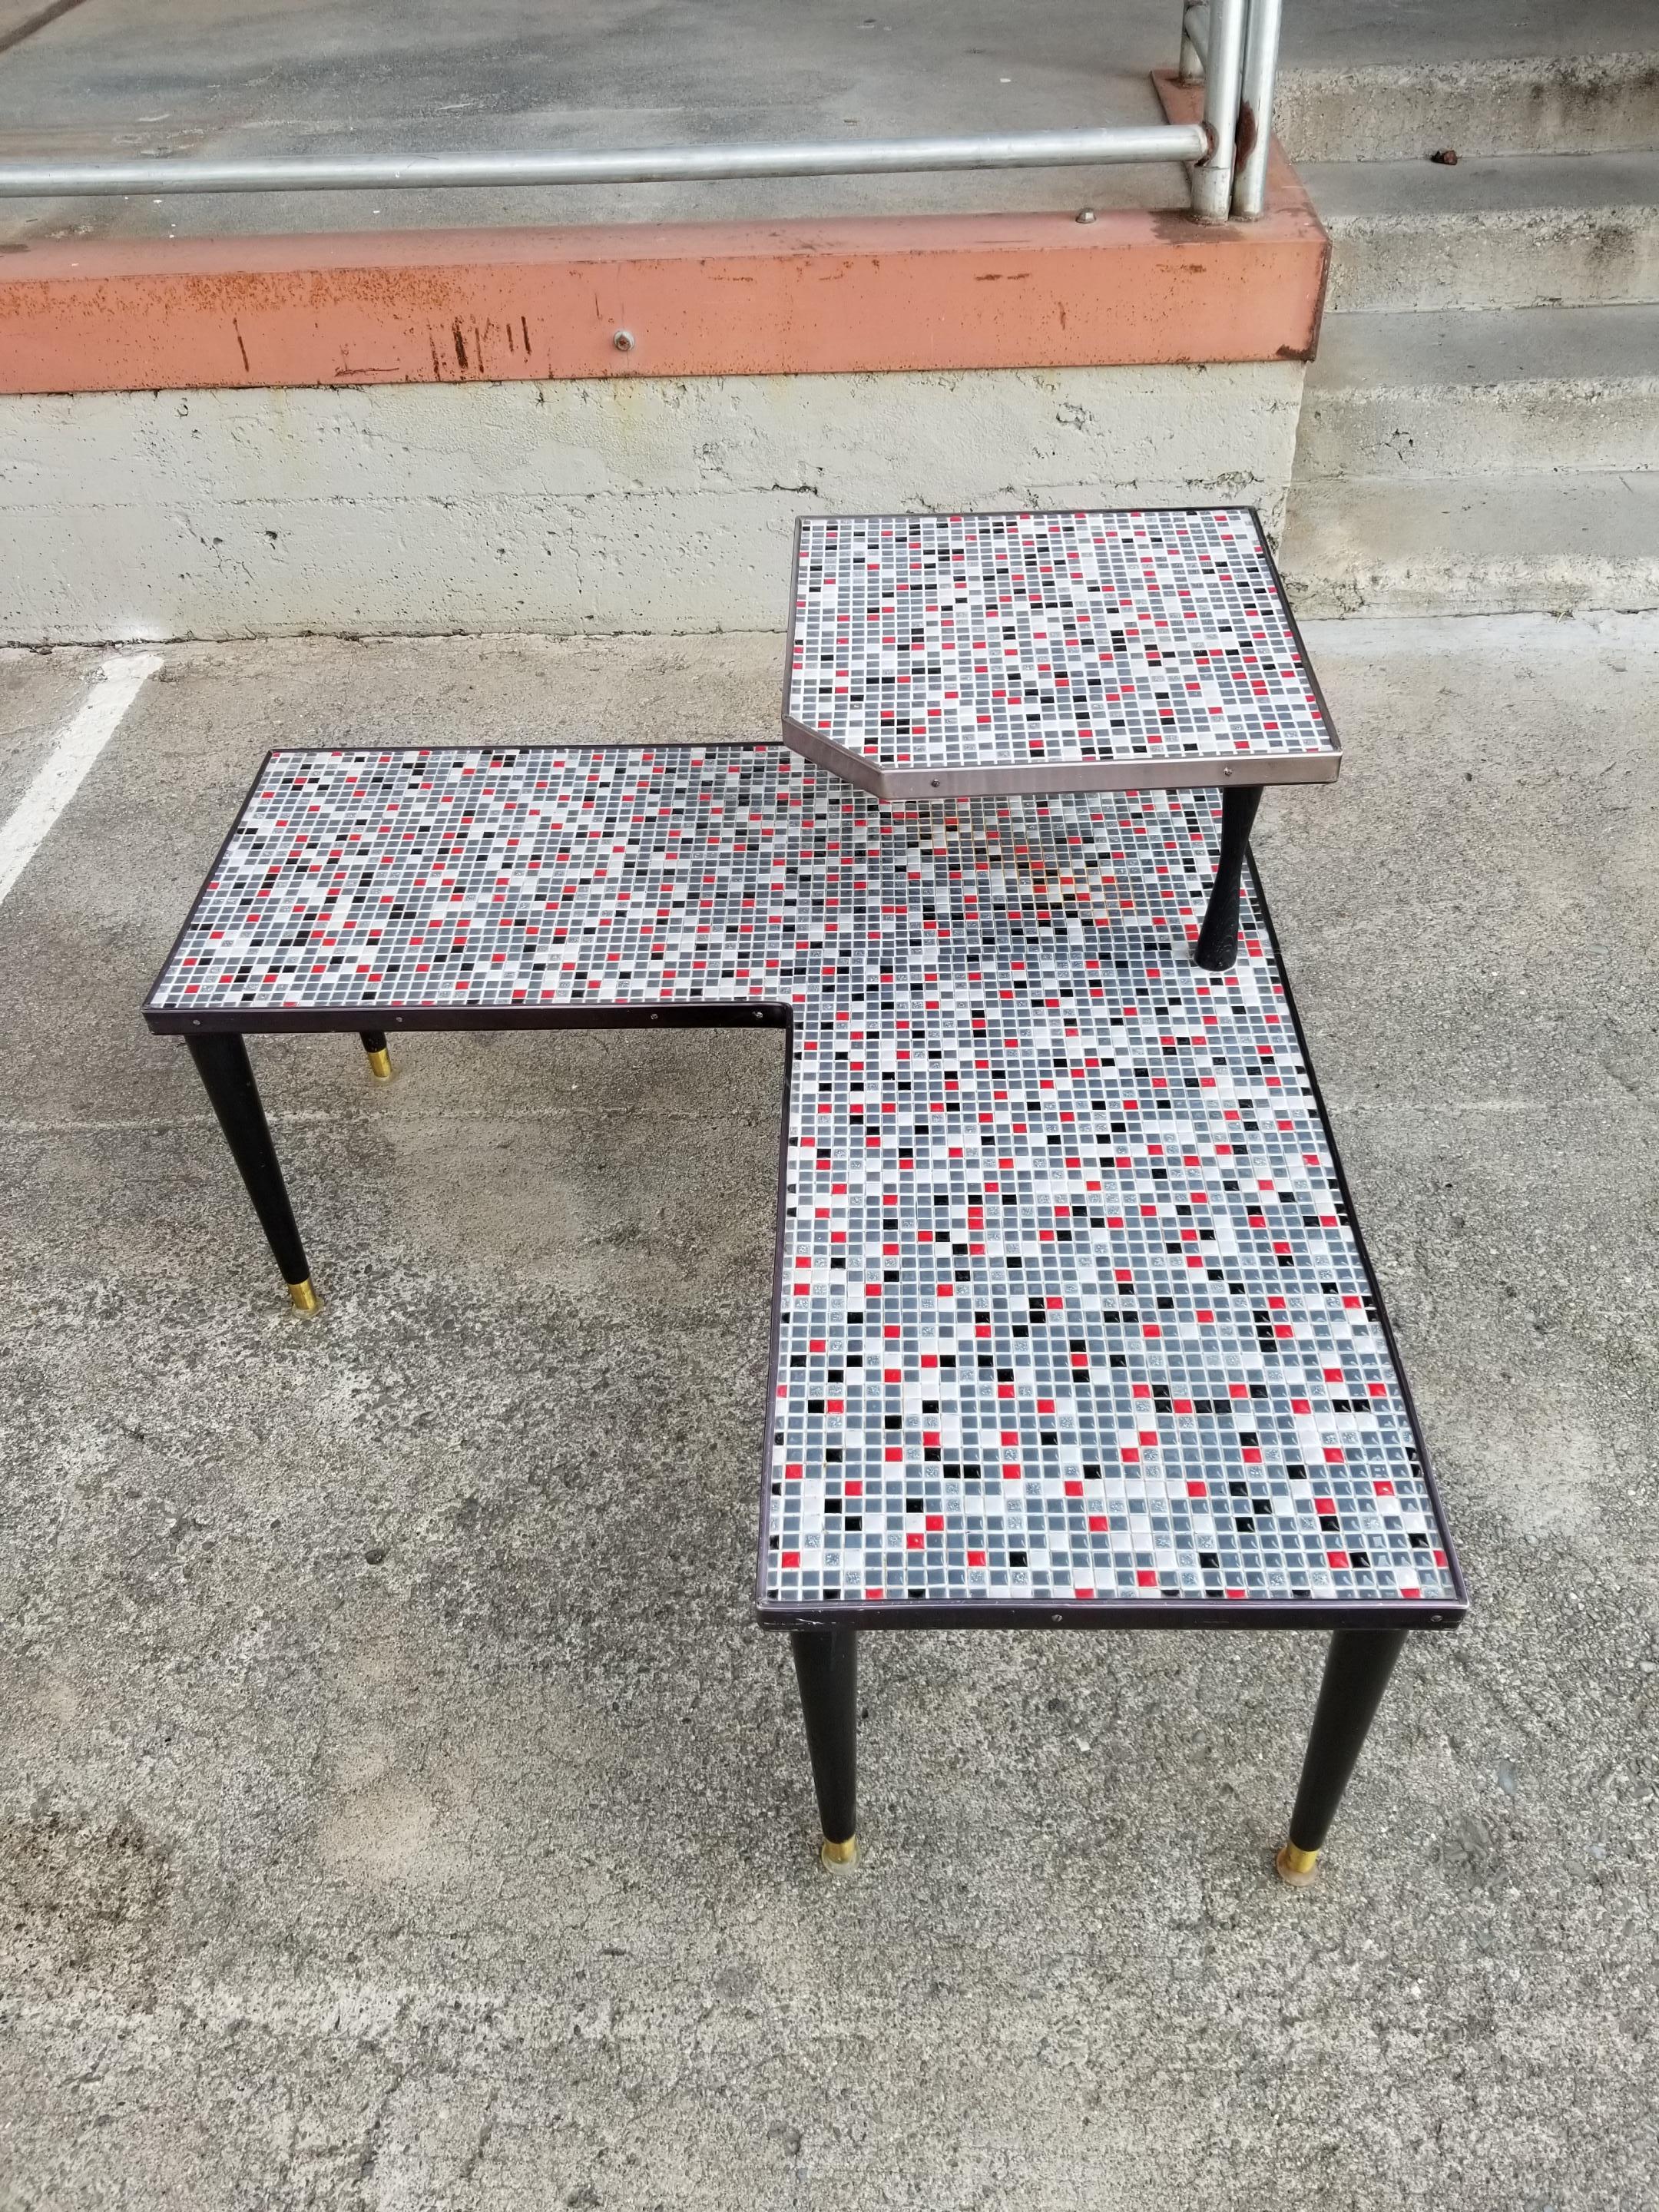 Very unusual two-tier mosaic tile corner table. Classic tapered peg legs construction, steel banded edges and hourglass post at upper tier table top. Nice brass cap plates at feet with all original glides intact. Multi-color square tiles in red,